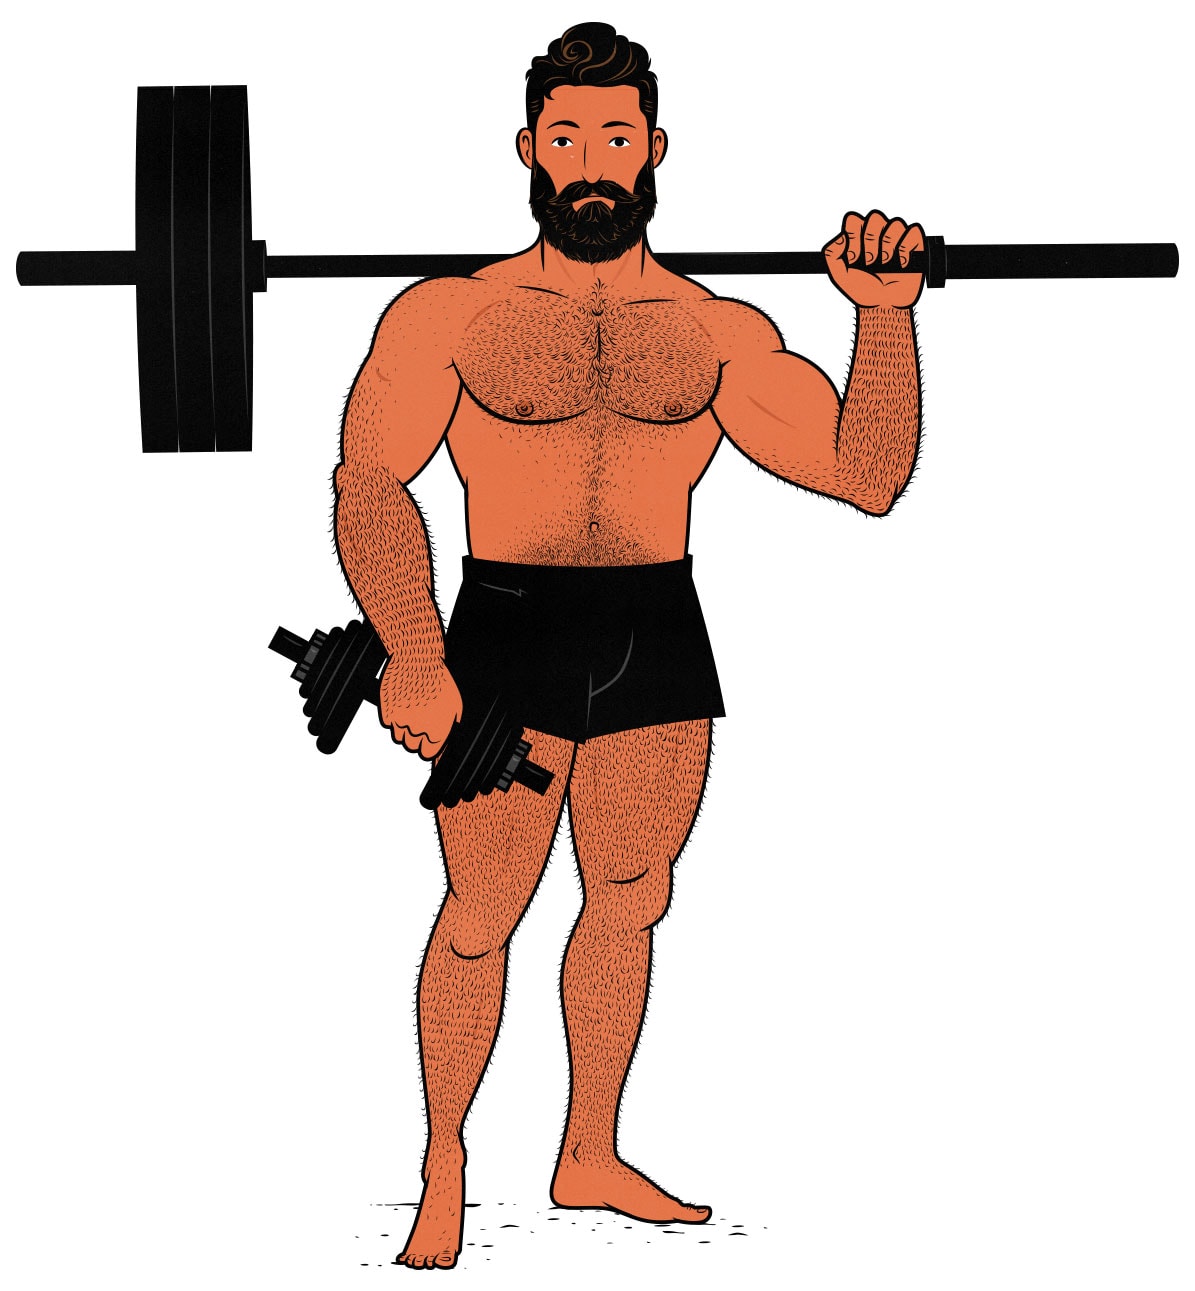 Illustration of a muscular man doing the farmer carry exercise to work his traps and grip.